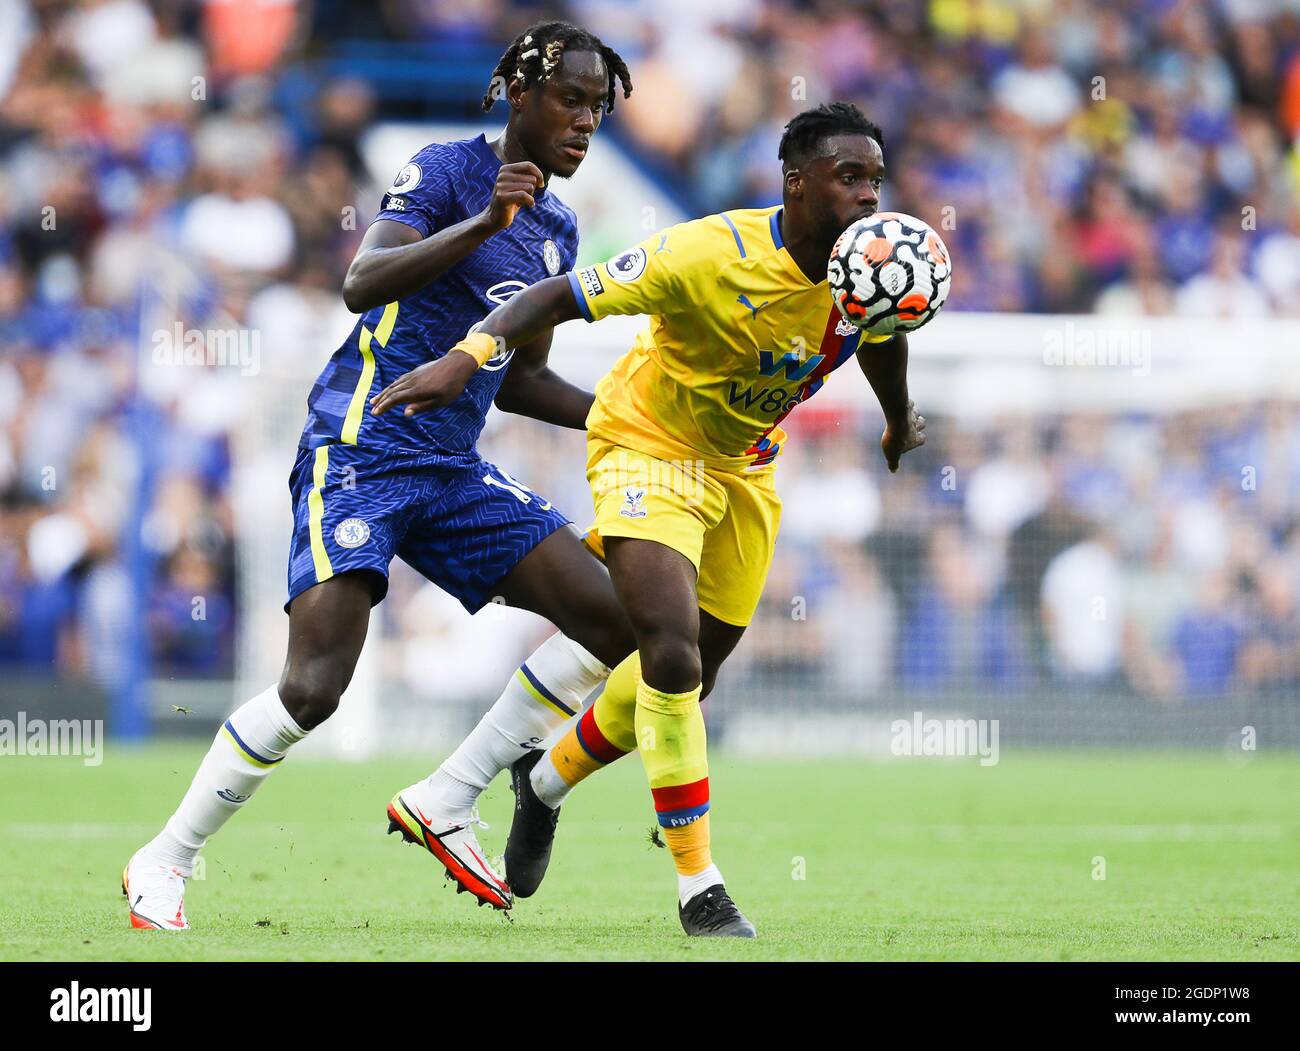 London, England, 14th August 2021. Trevoh Chalobah of Chelsea and Jeffrey Schlupp of Crystal Palace during the Premier League match at Stamford Bridge, London. Picture credit should read: Paul Terry / Sportimage Stock Photo